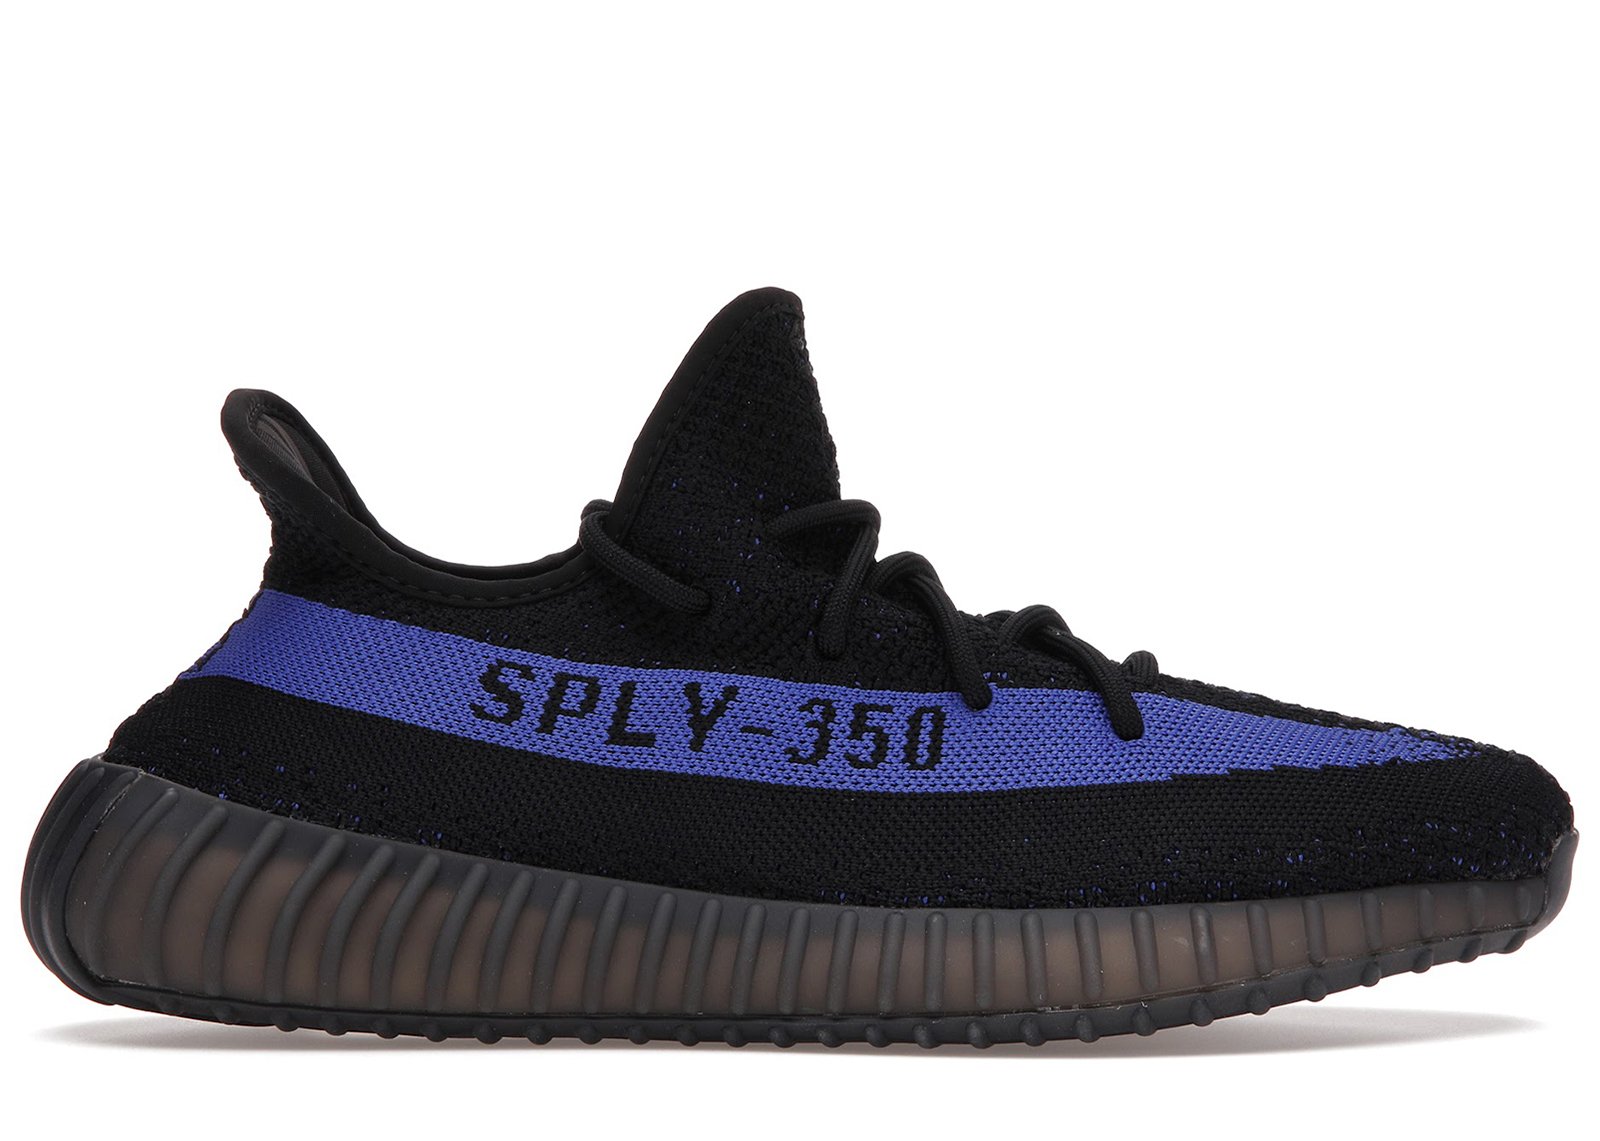 adidas Yeezy Boost 350 V2 Dazzling Blue sneakers